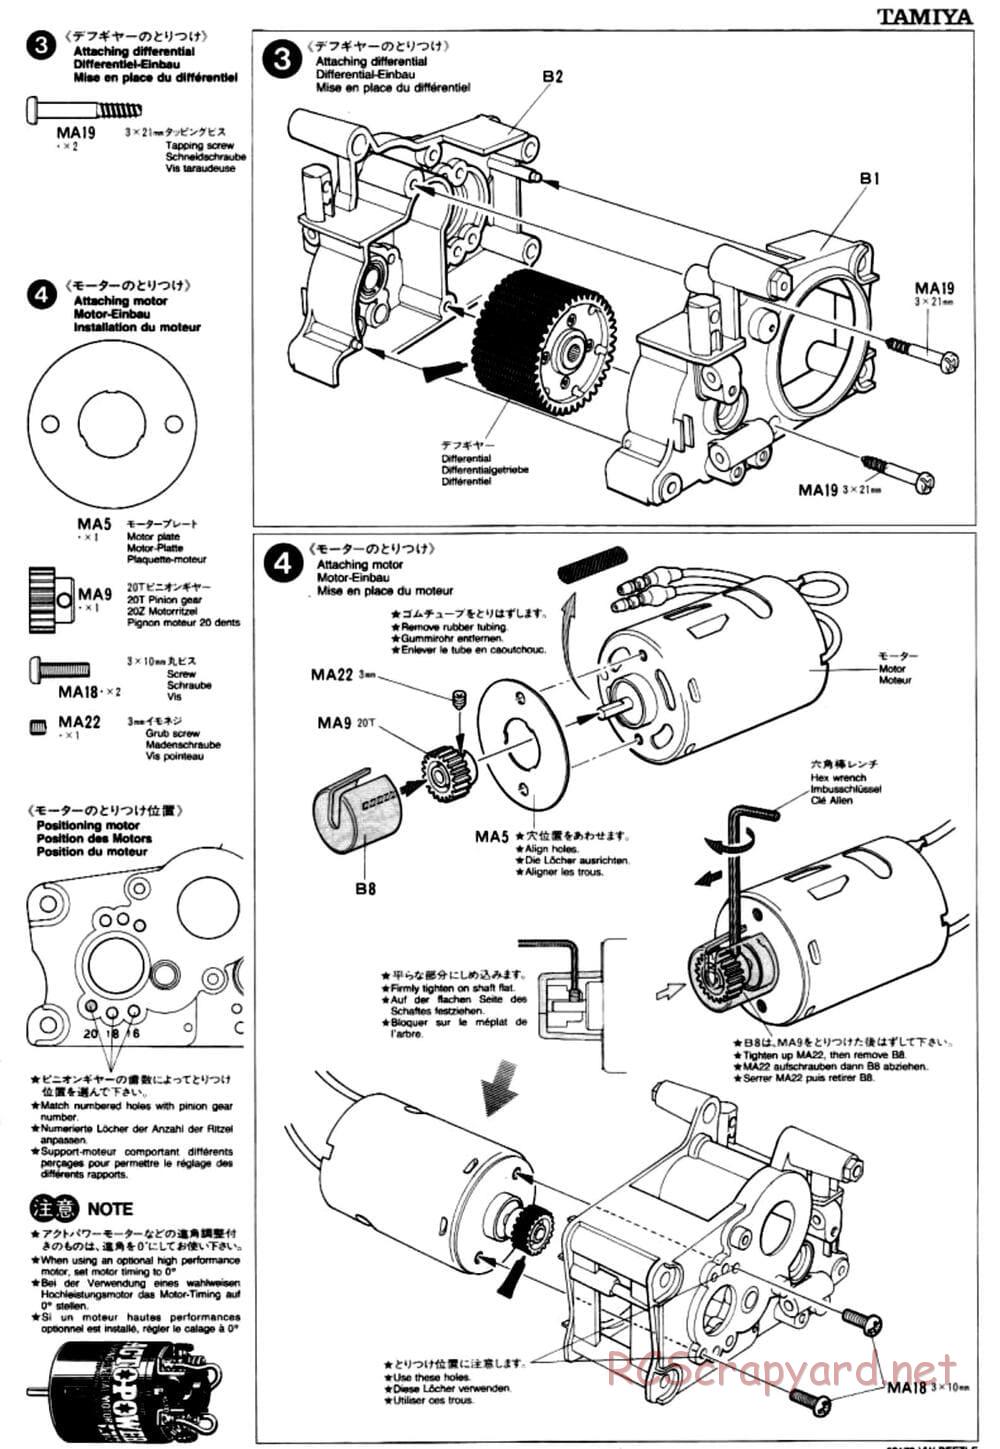 Tamiya - Volkswagen Beetle - M02L Chassis - Manual - Page 5